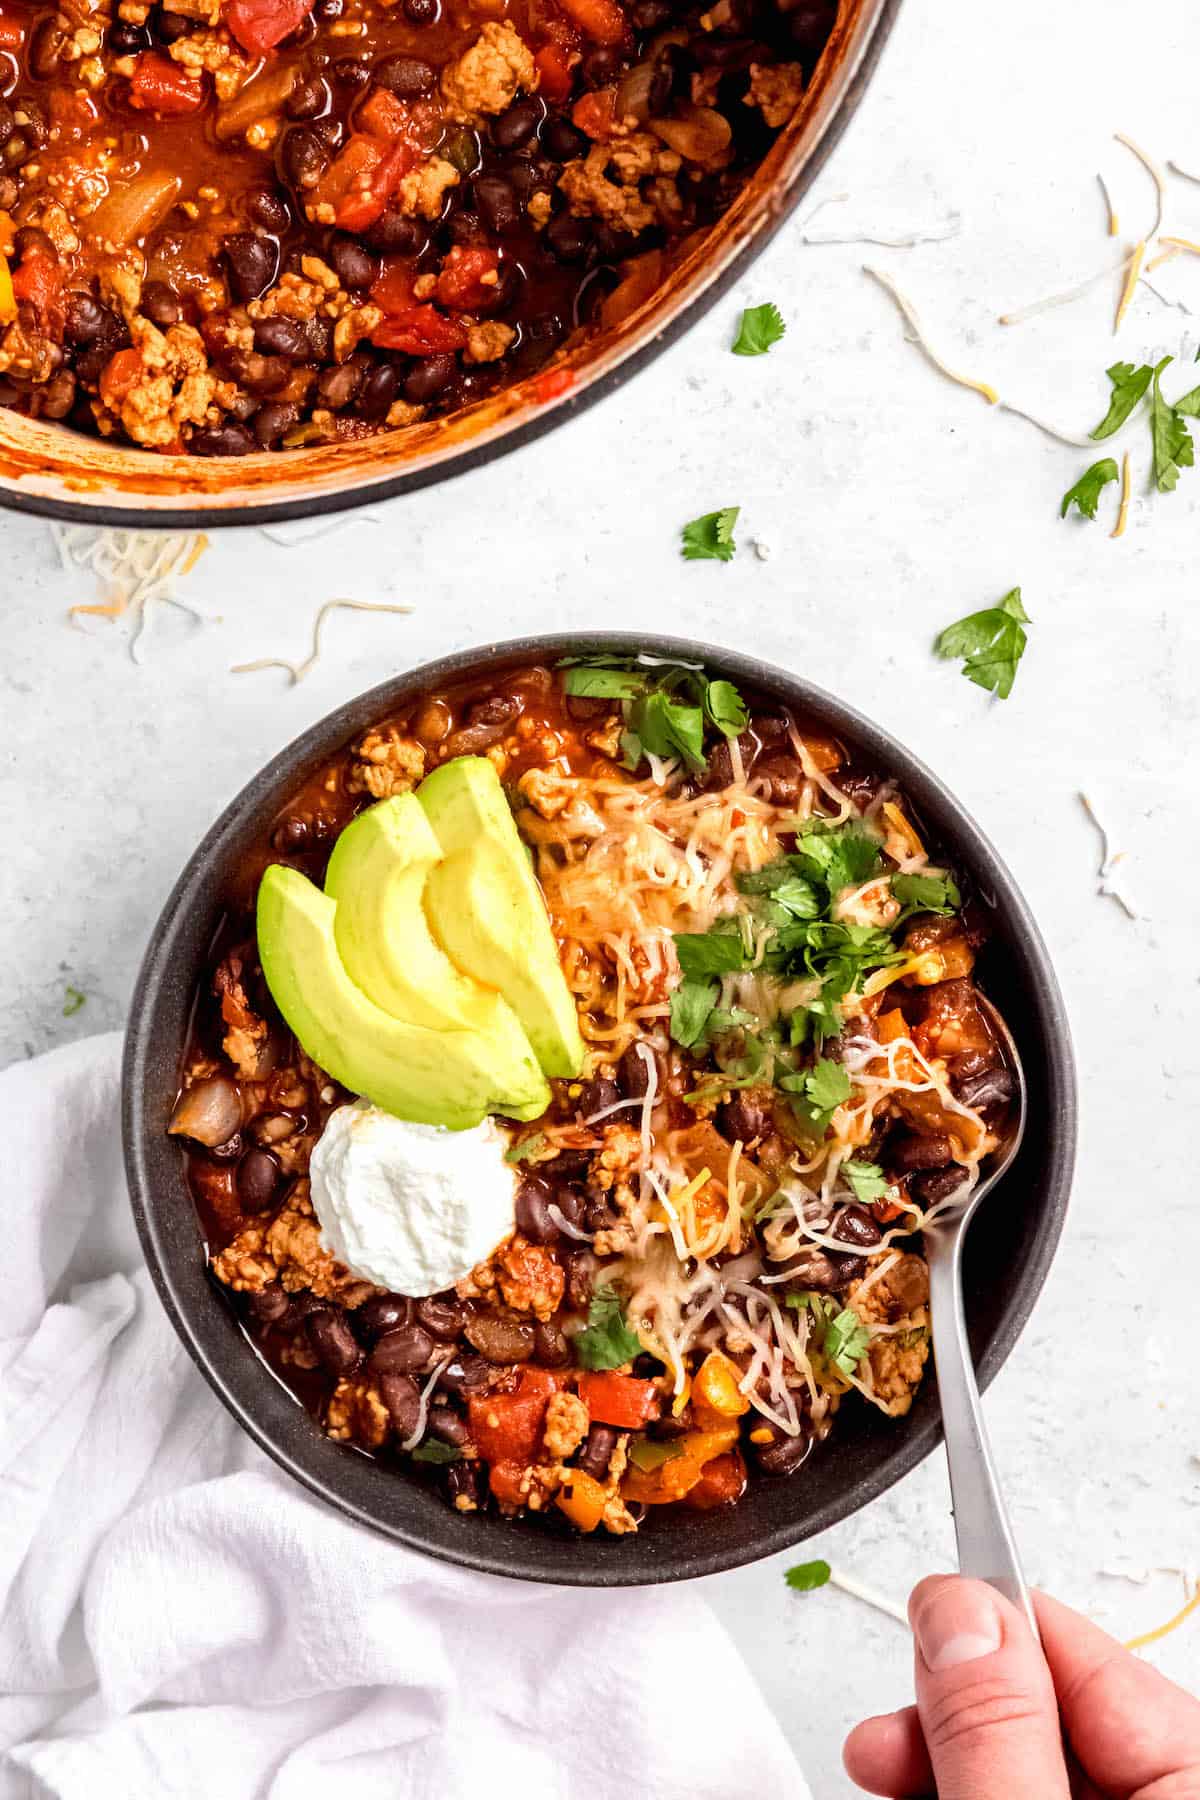 hero image of a black bowl of spicy black bean chicken chili with cheese, avocado, and cilantro garnishes with a hand holding a silver spoon.